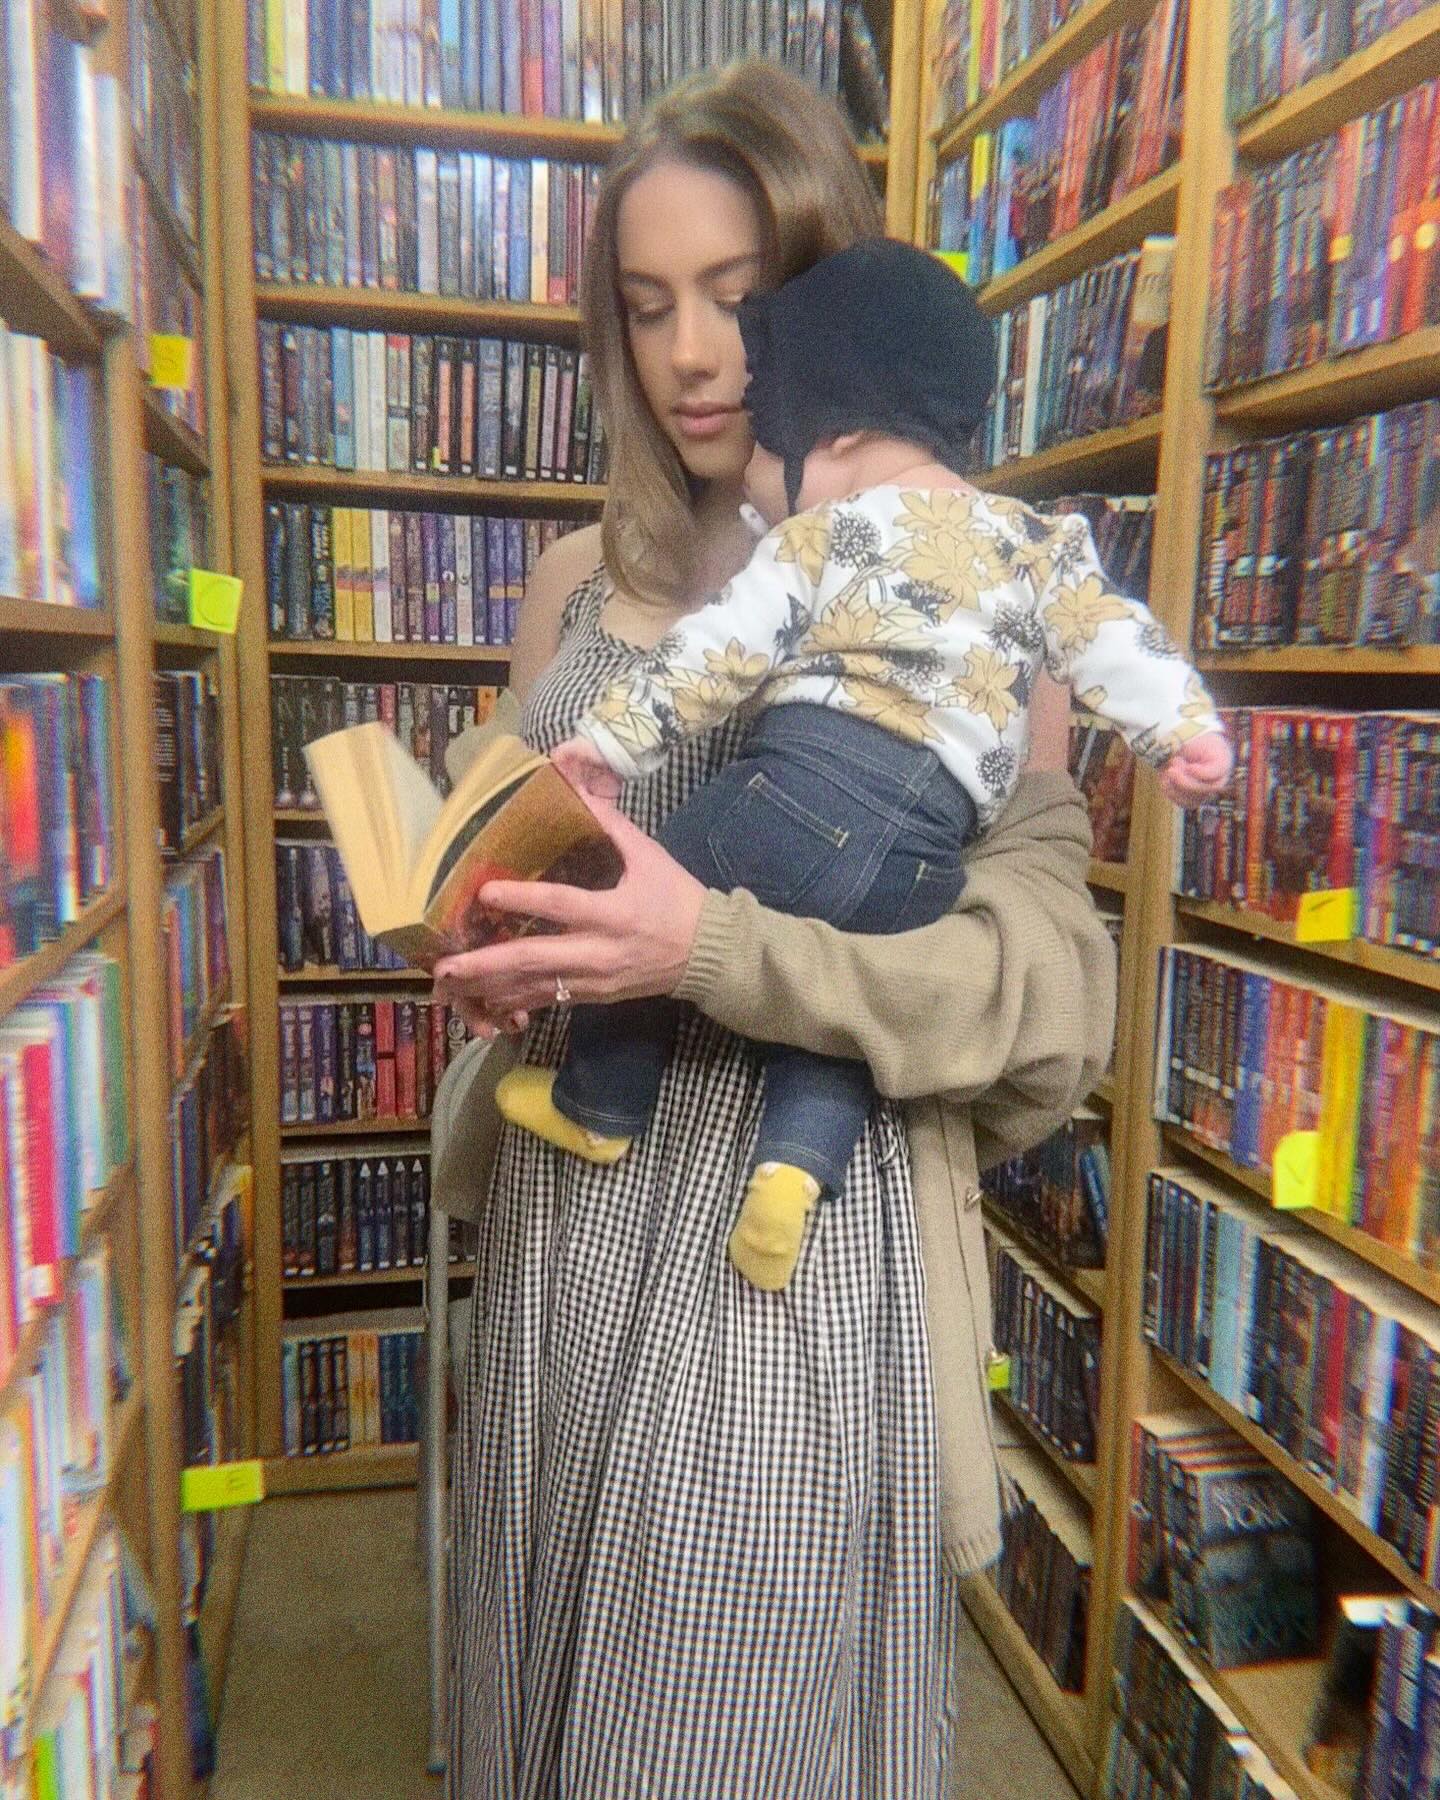 took the little bean to one of our favorite used book stores and corey snapped these very pinterest aesthetic photos for me 📚🤍
.
.
@the_ilolas @seretailexpo